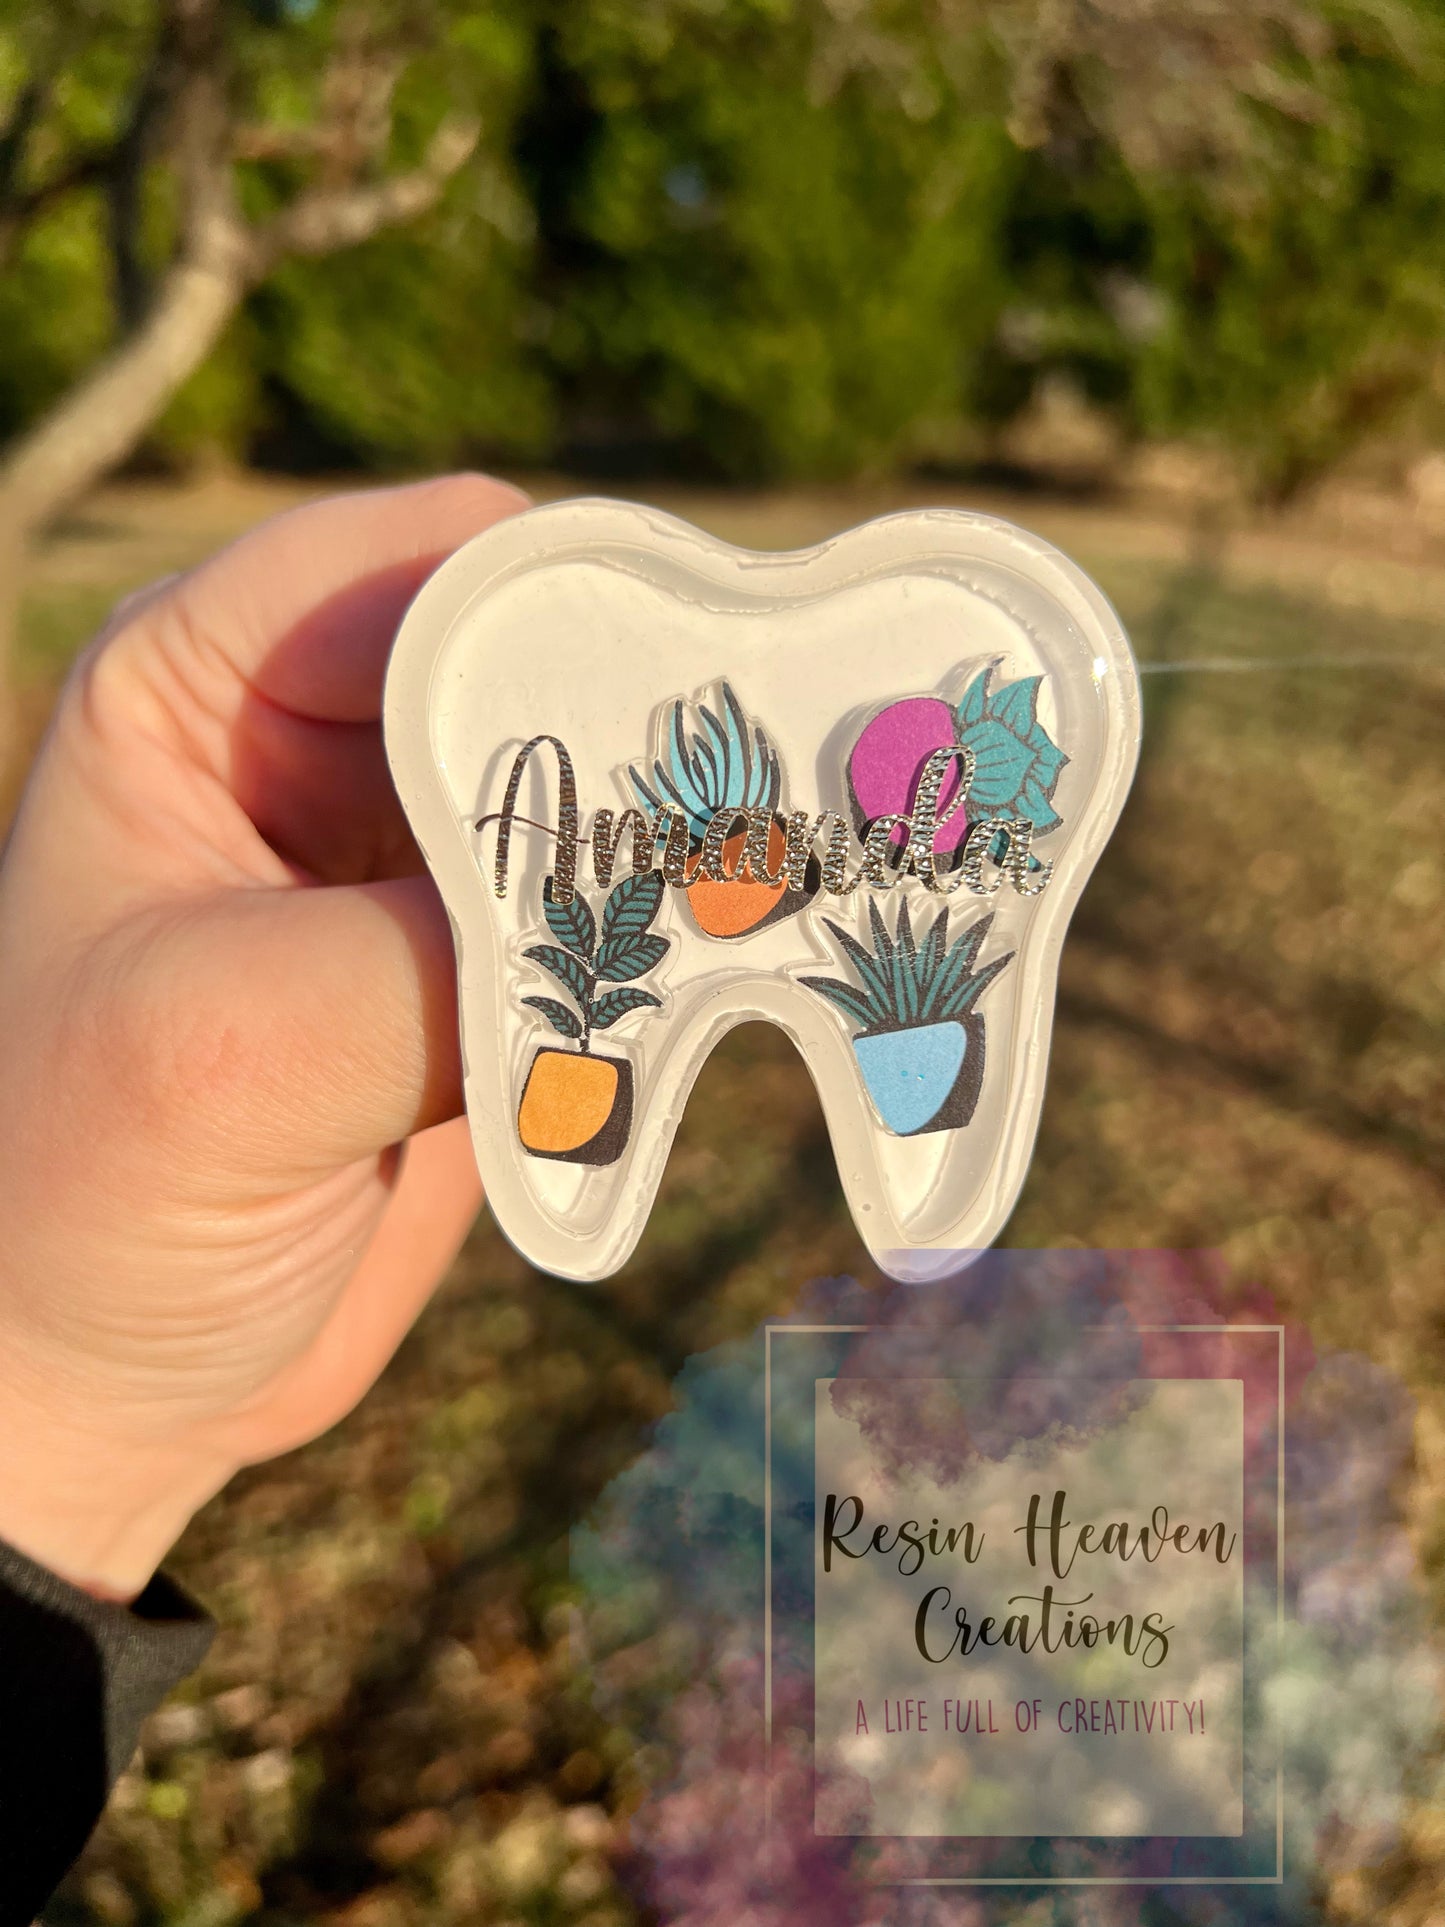 Plant lady tooth name tag